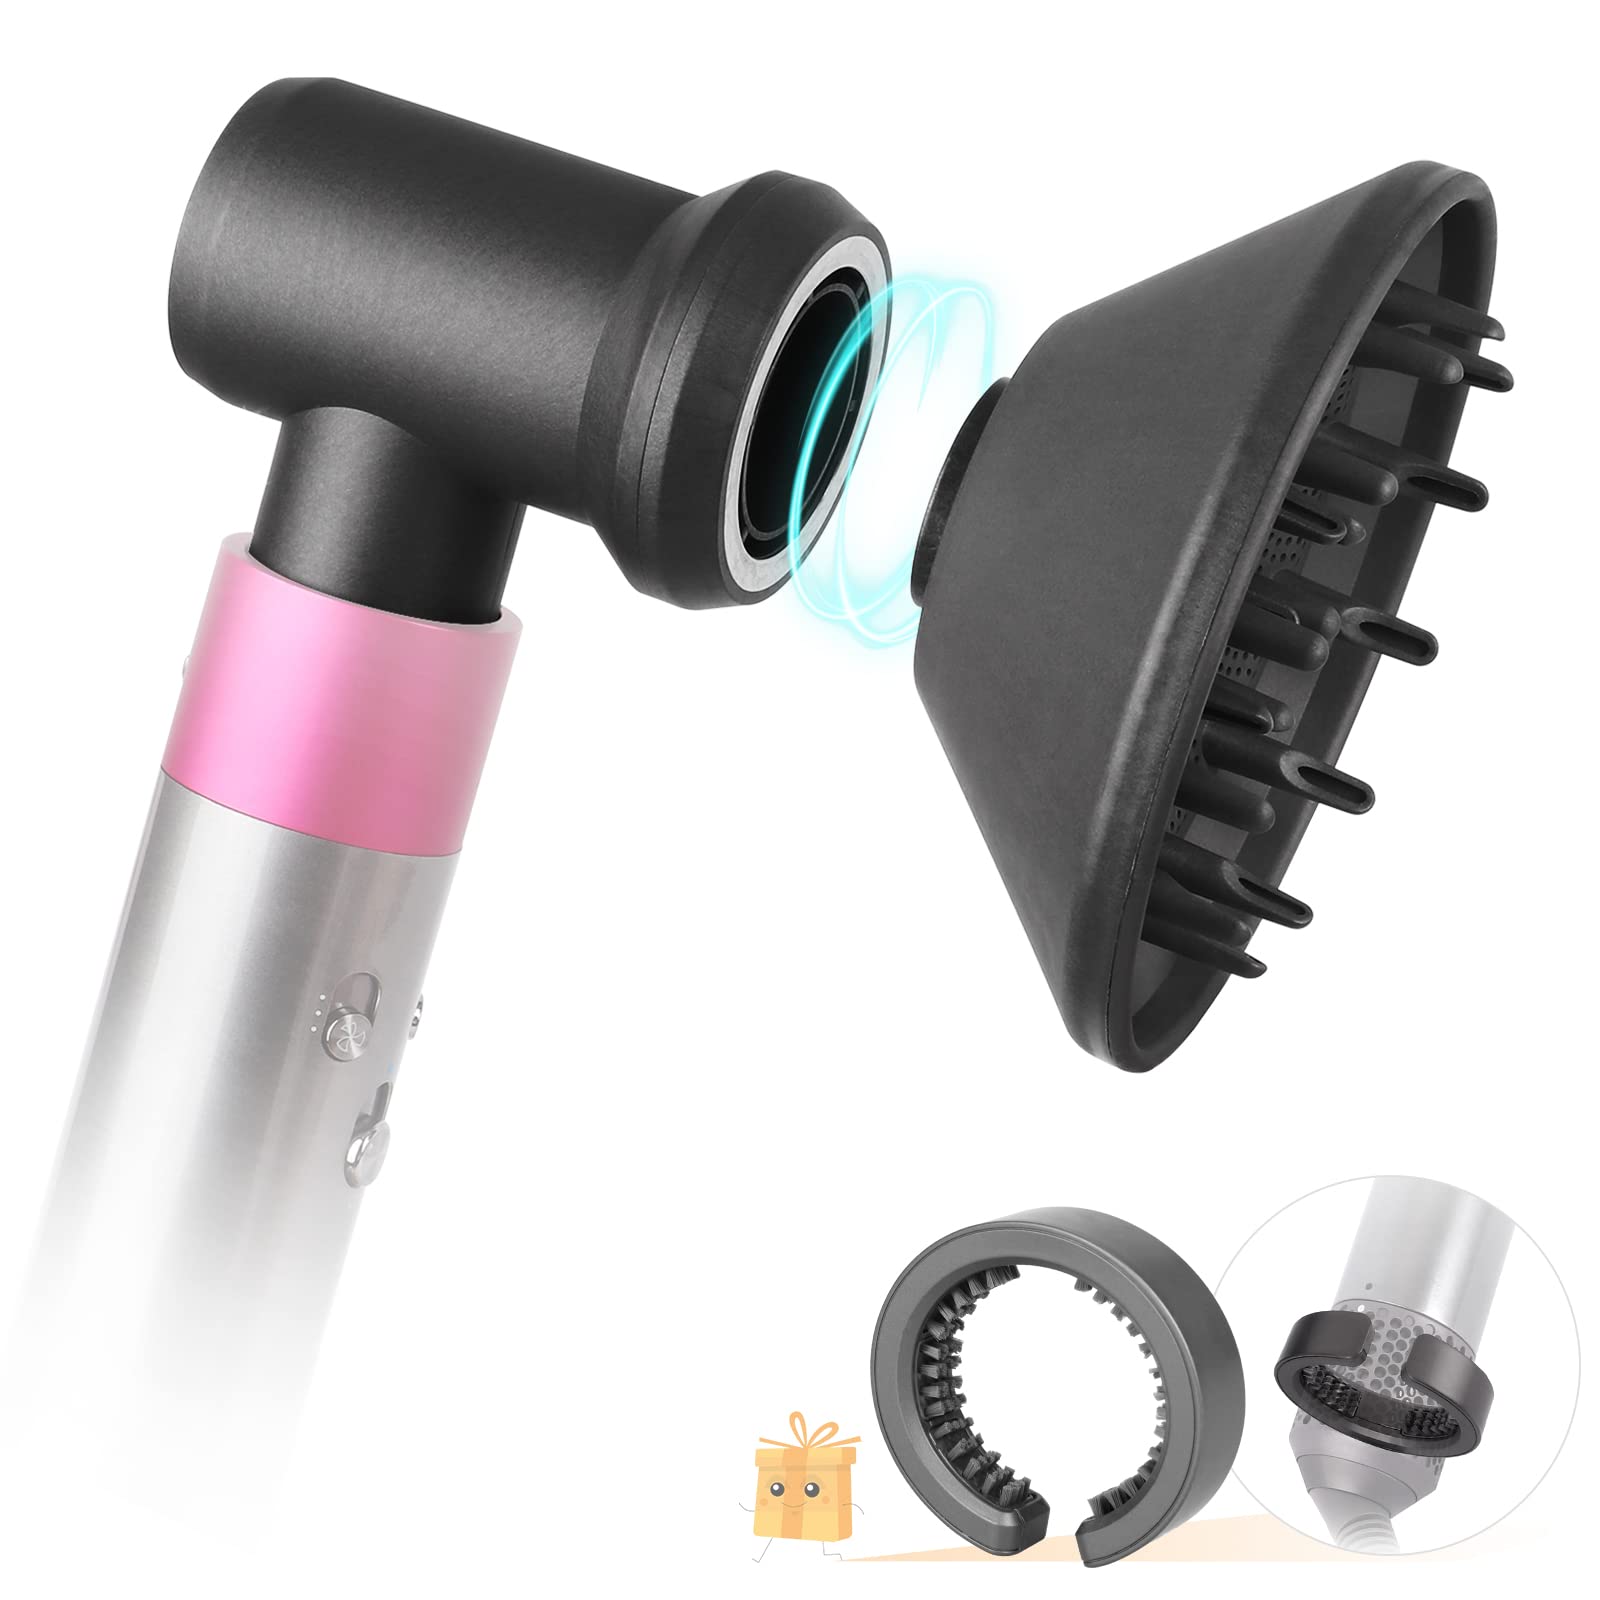 Diffuser and Adaptor for Dyson Airwrap Styler Attachments, Converting Your  Air Wrap Curling Styler to A Hair Dryer